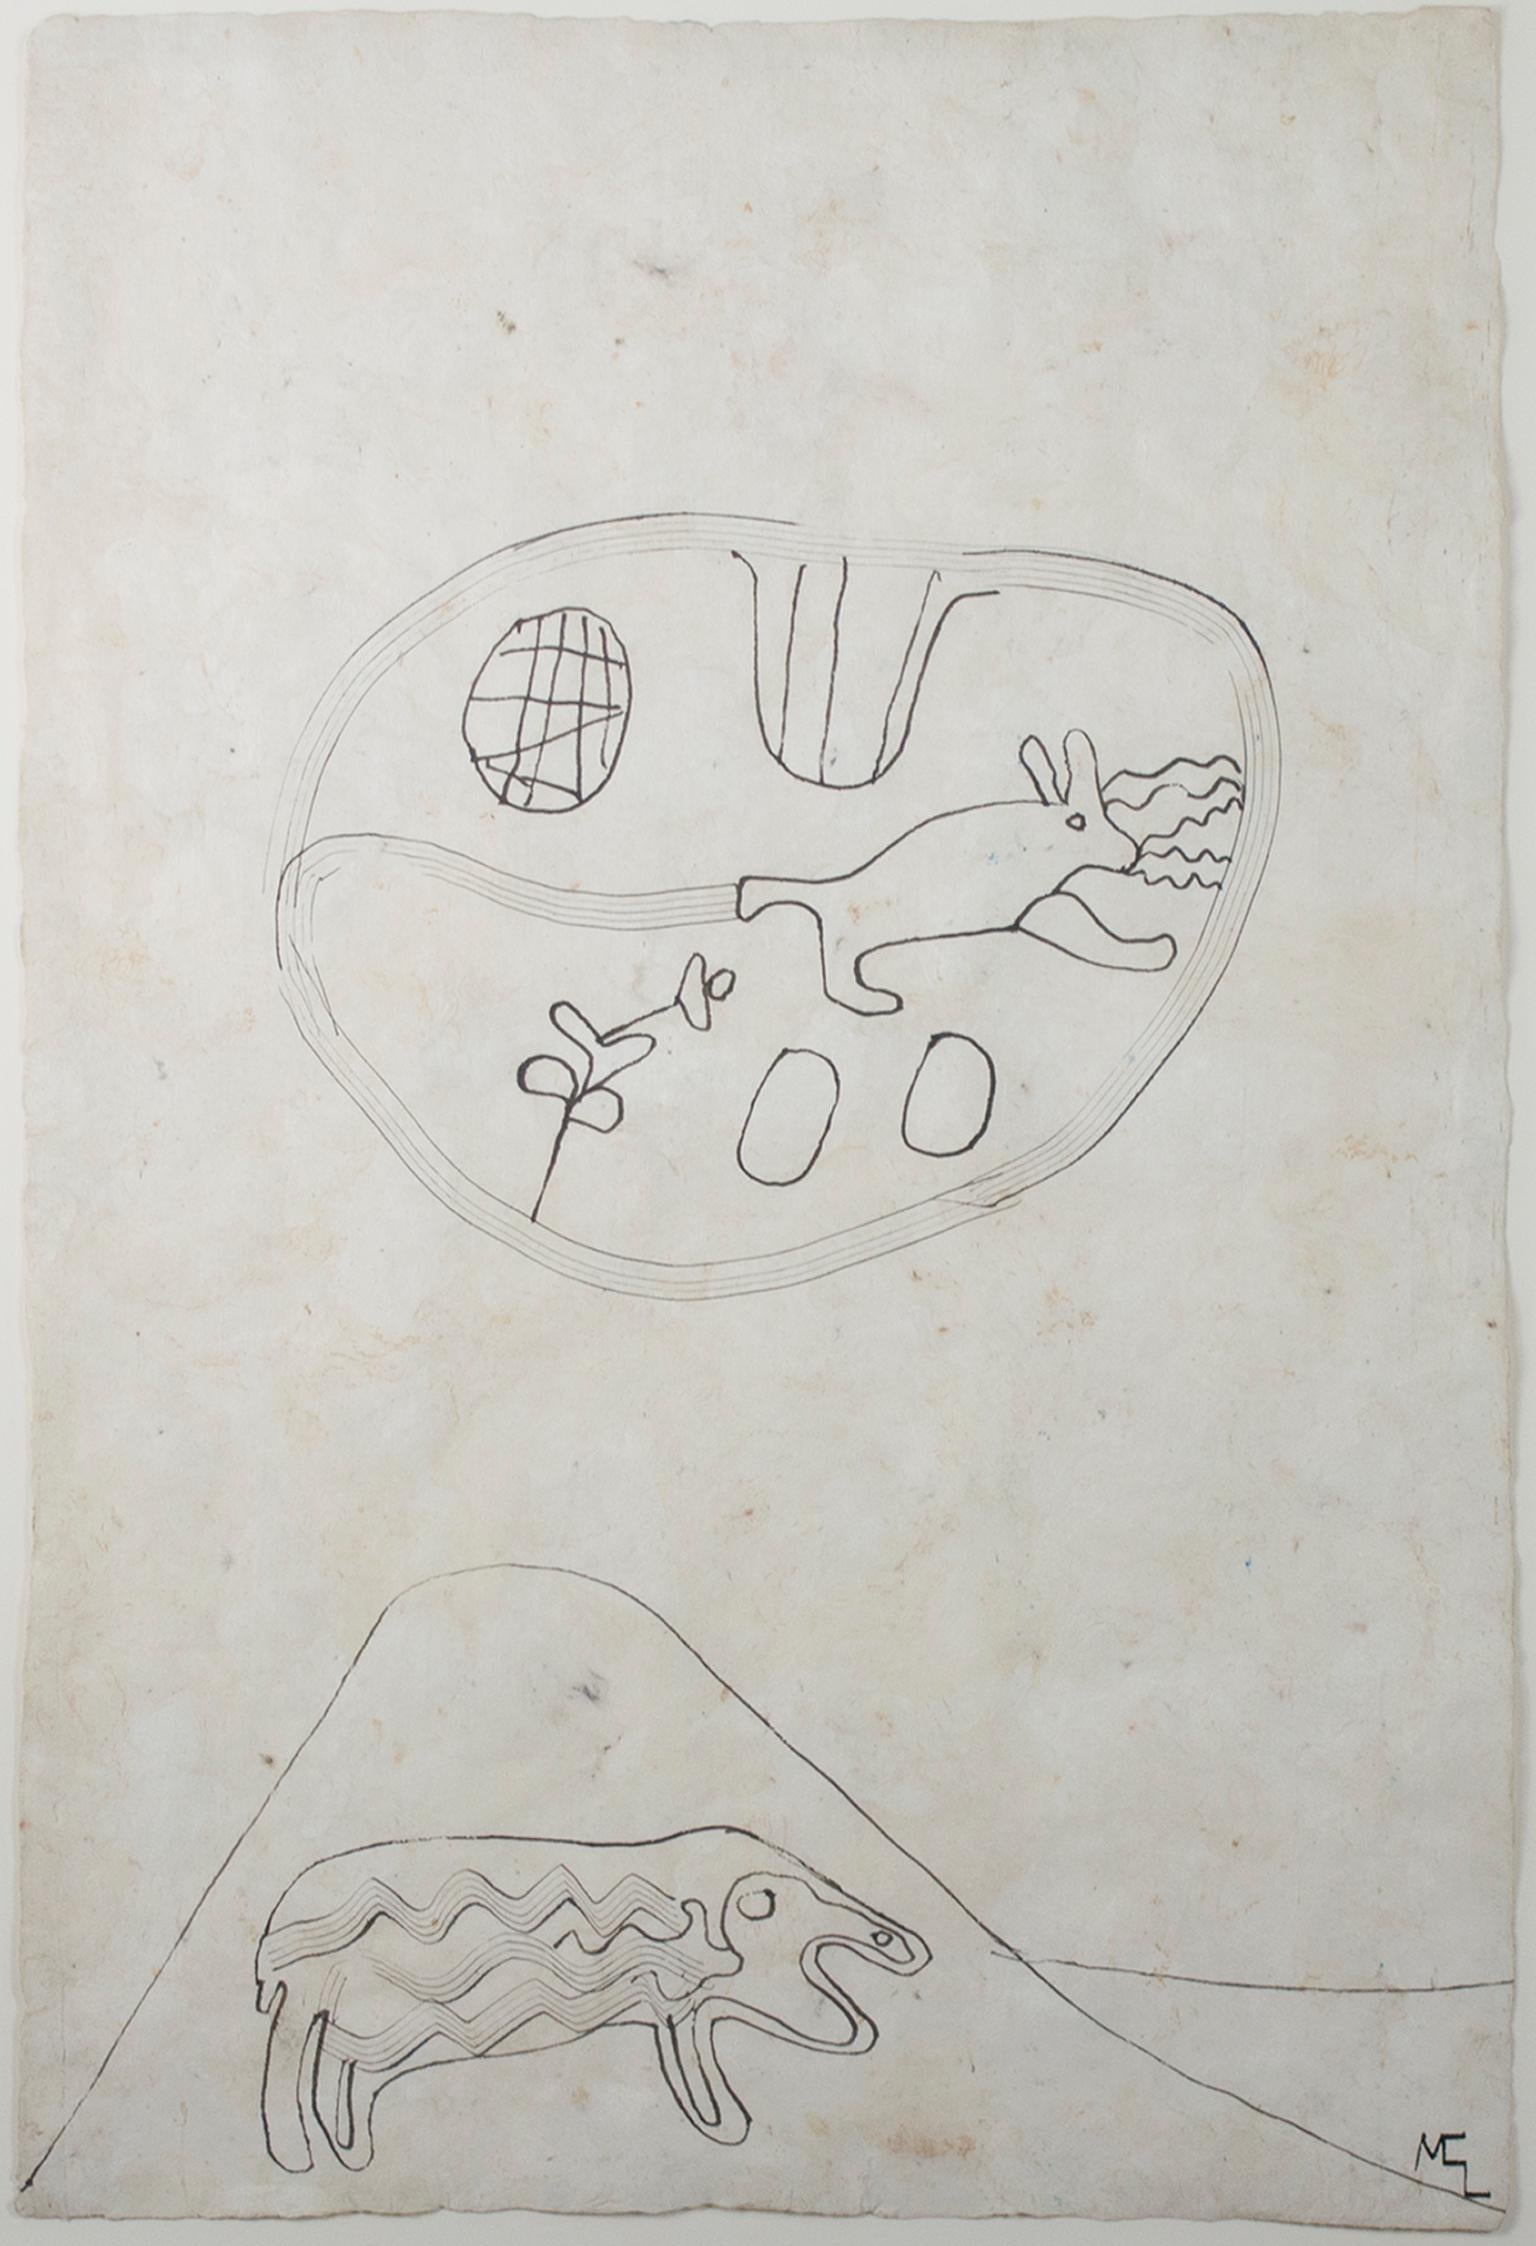 "Sheep, Rabbit in Desert" is an original ink drawing on handmade amate paper by Miguel Castro Leñero. The artist initialed the piece lower right. This piece features two abstracted animals. 

23 1/2" x 15 3/4" 

Elegant and elementary compositions